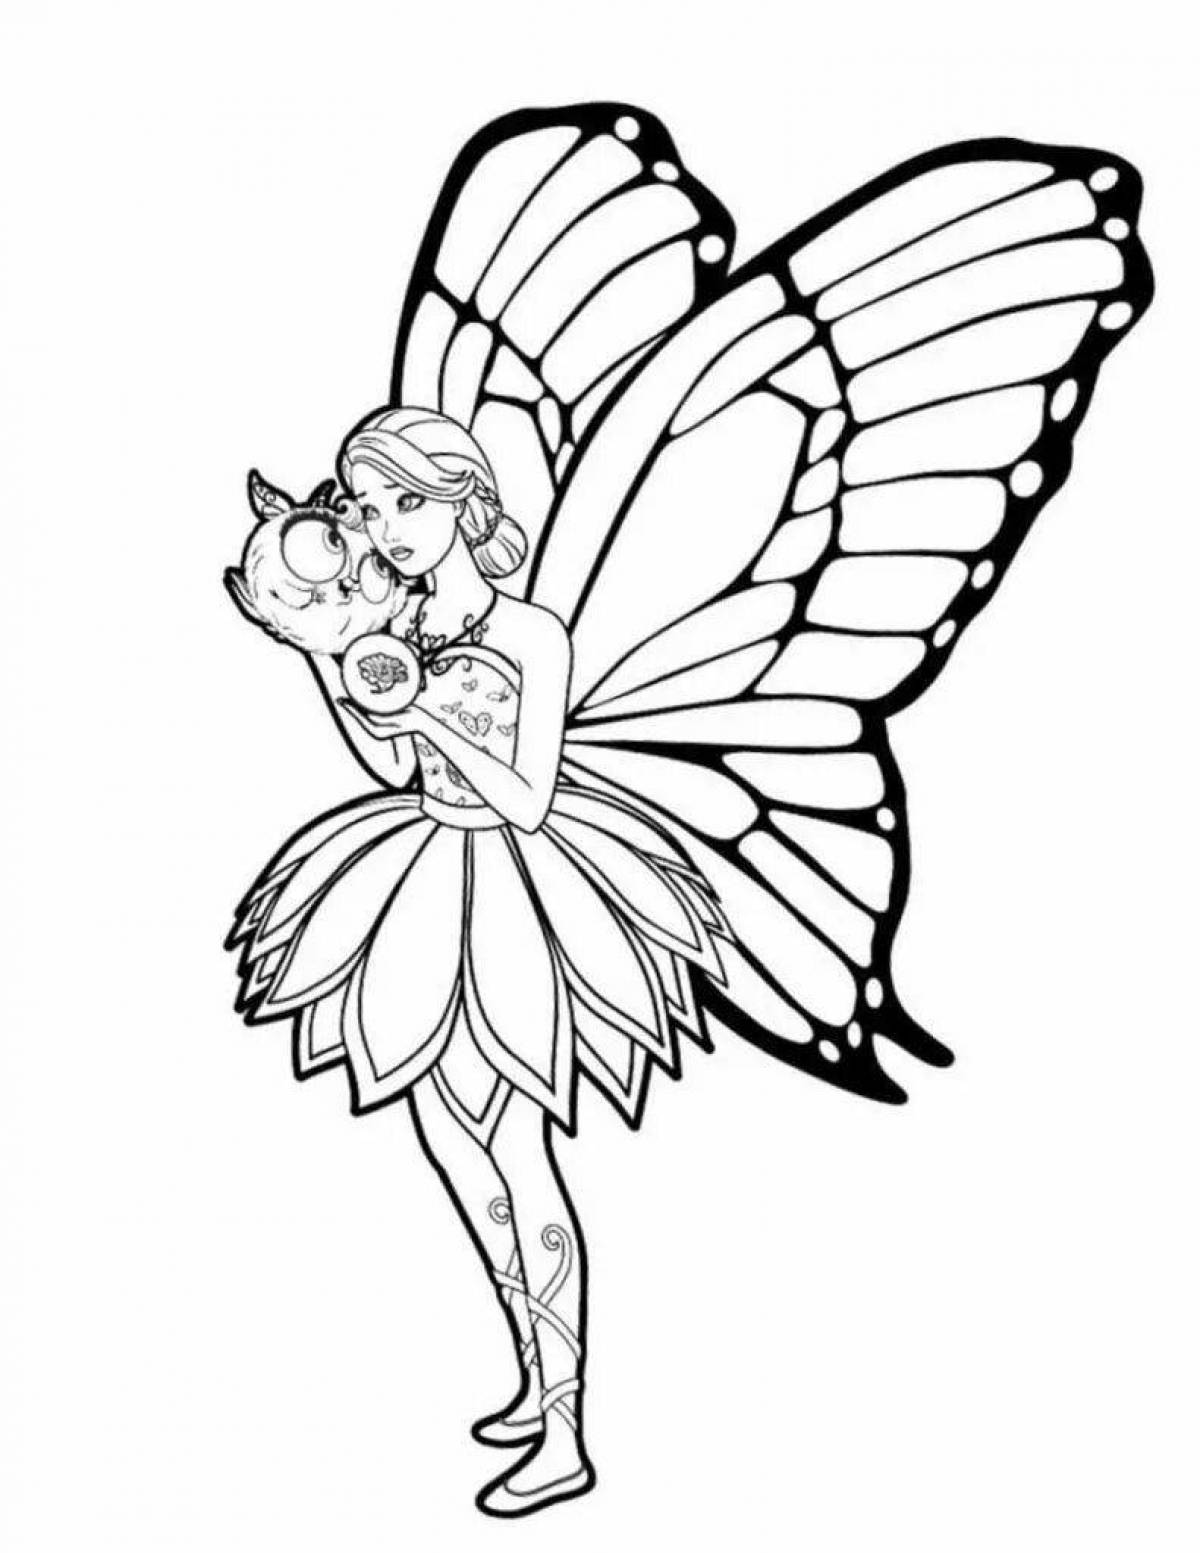 Playful fairy coloring with wings